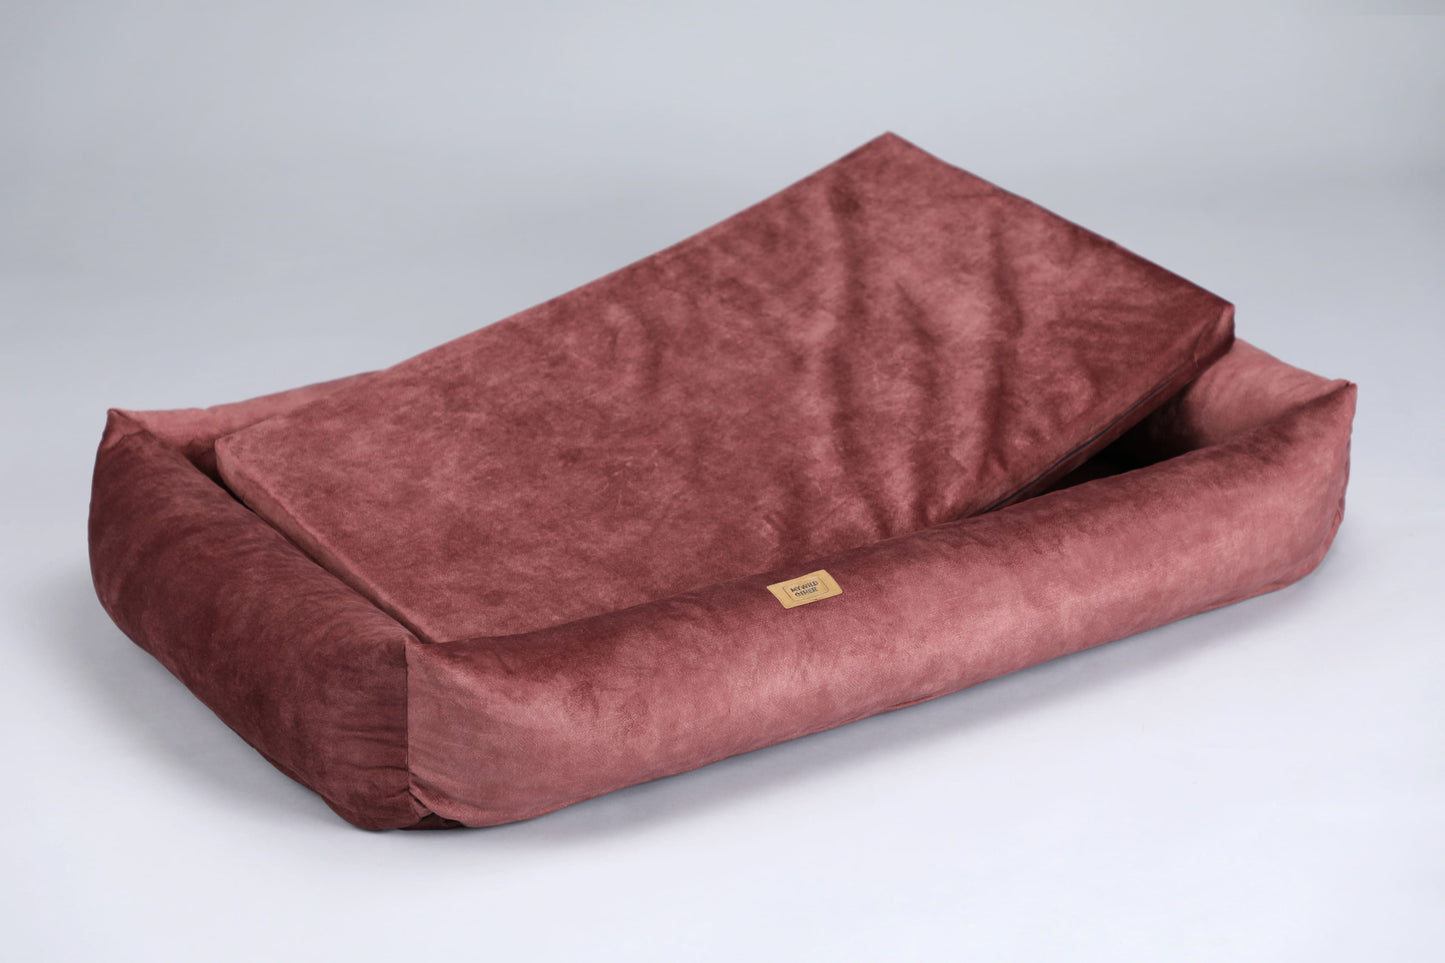 Premium dog bed with sides | 2-sided | TERRACOTTA - premium dog goods handmade in Europe by animalistus